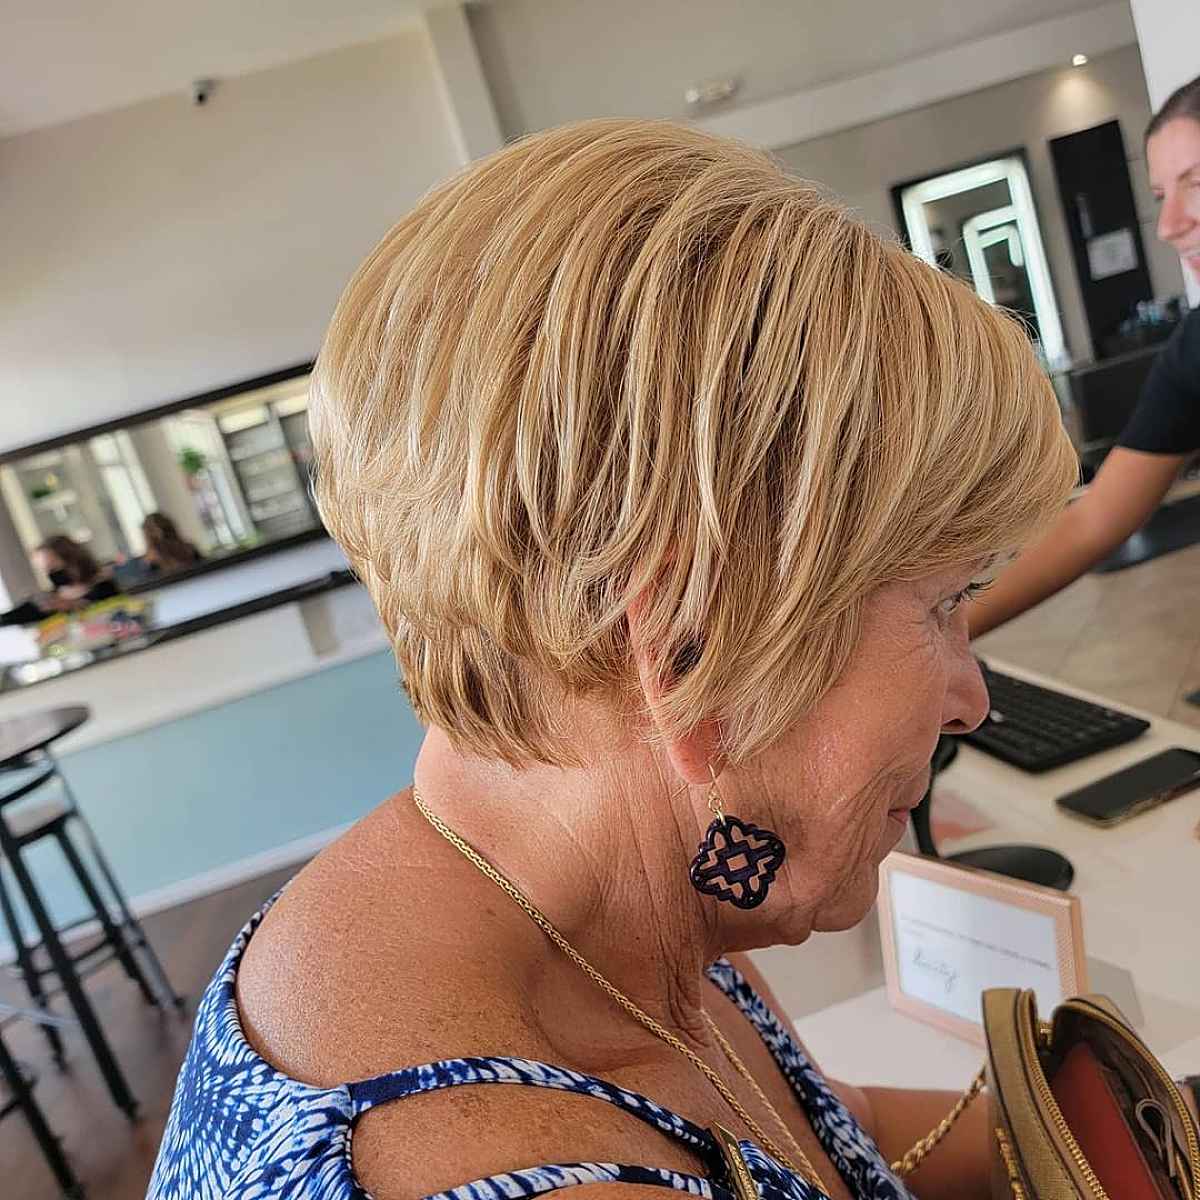 Short Wash-and-Wear Cut for ladies past their 60s